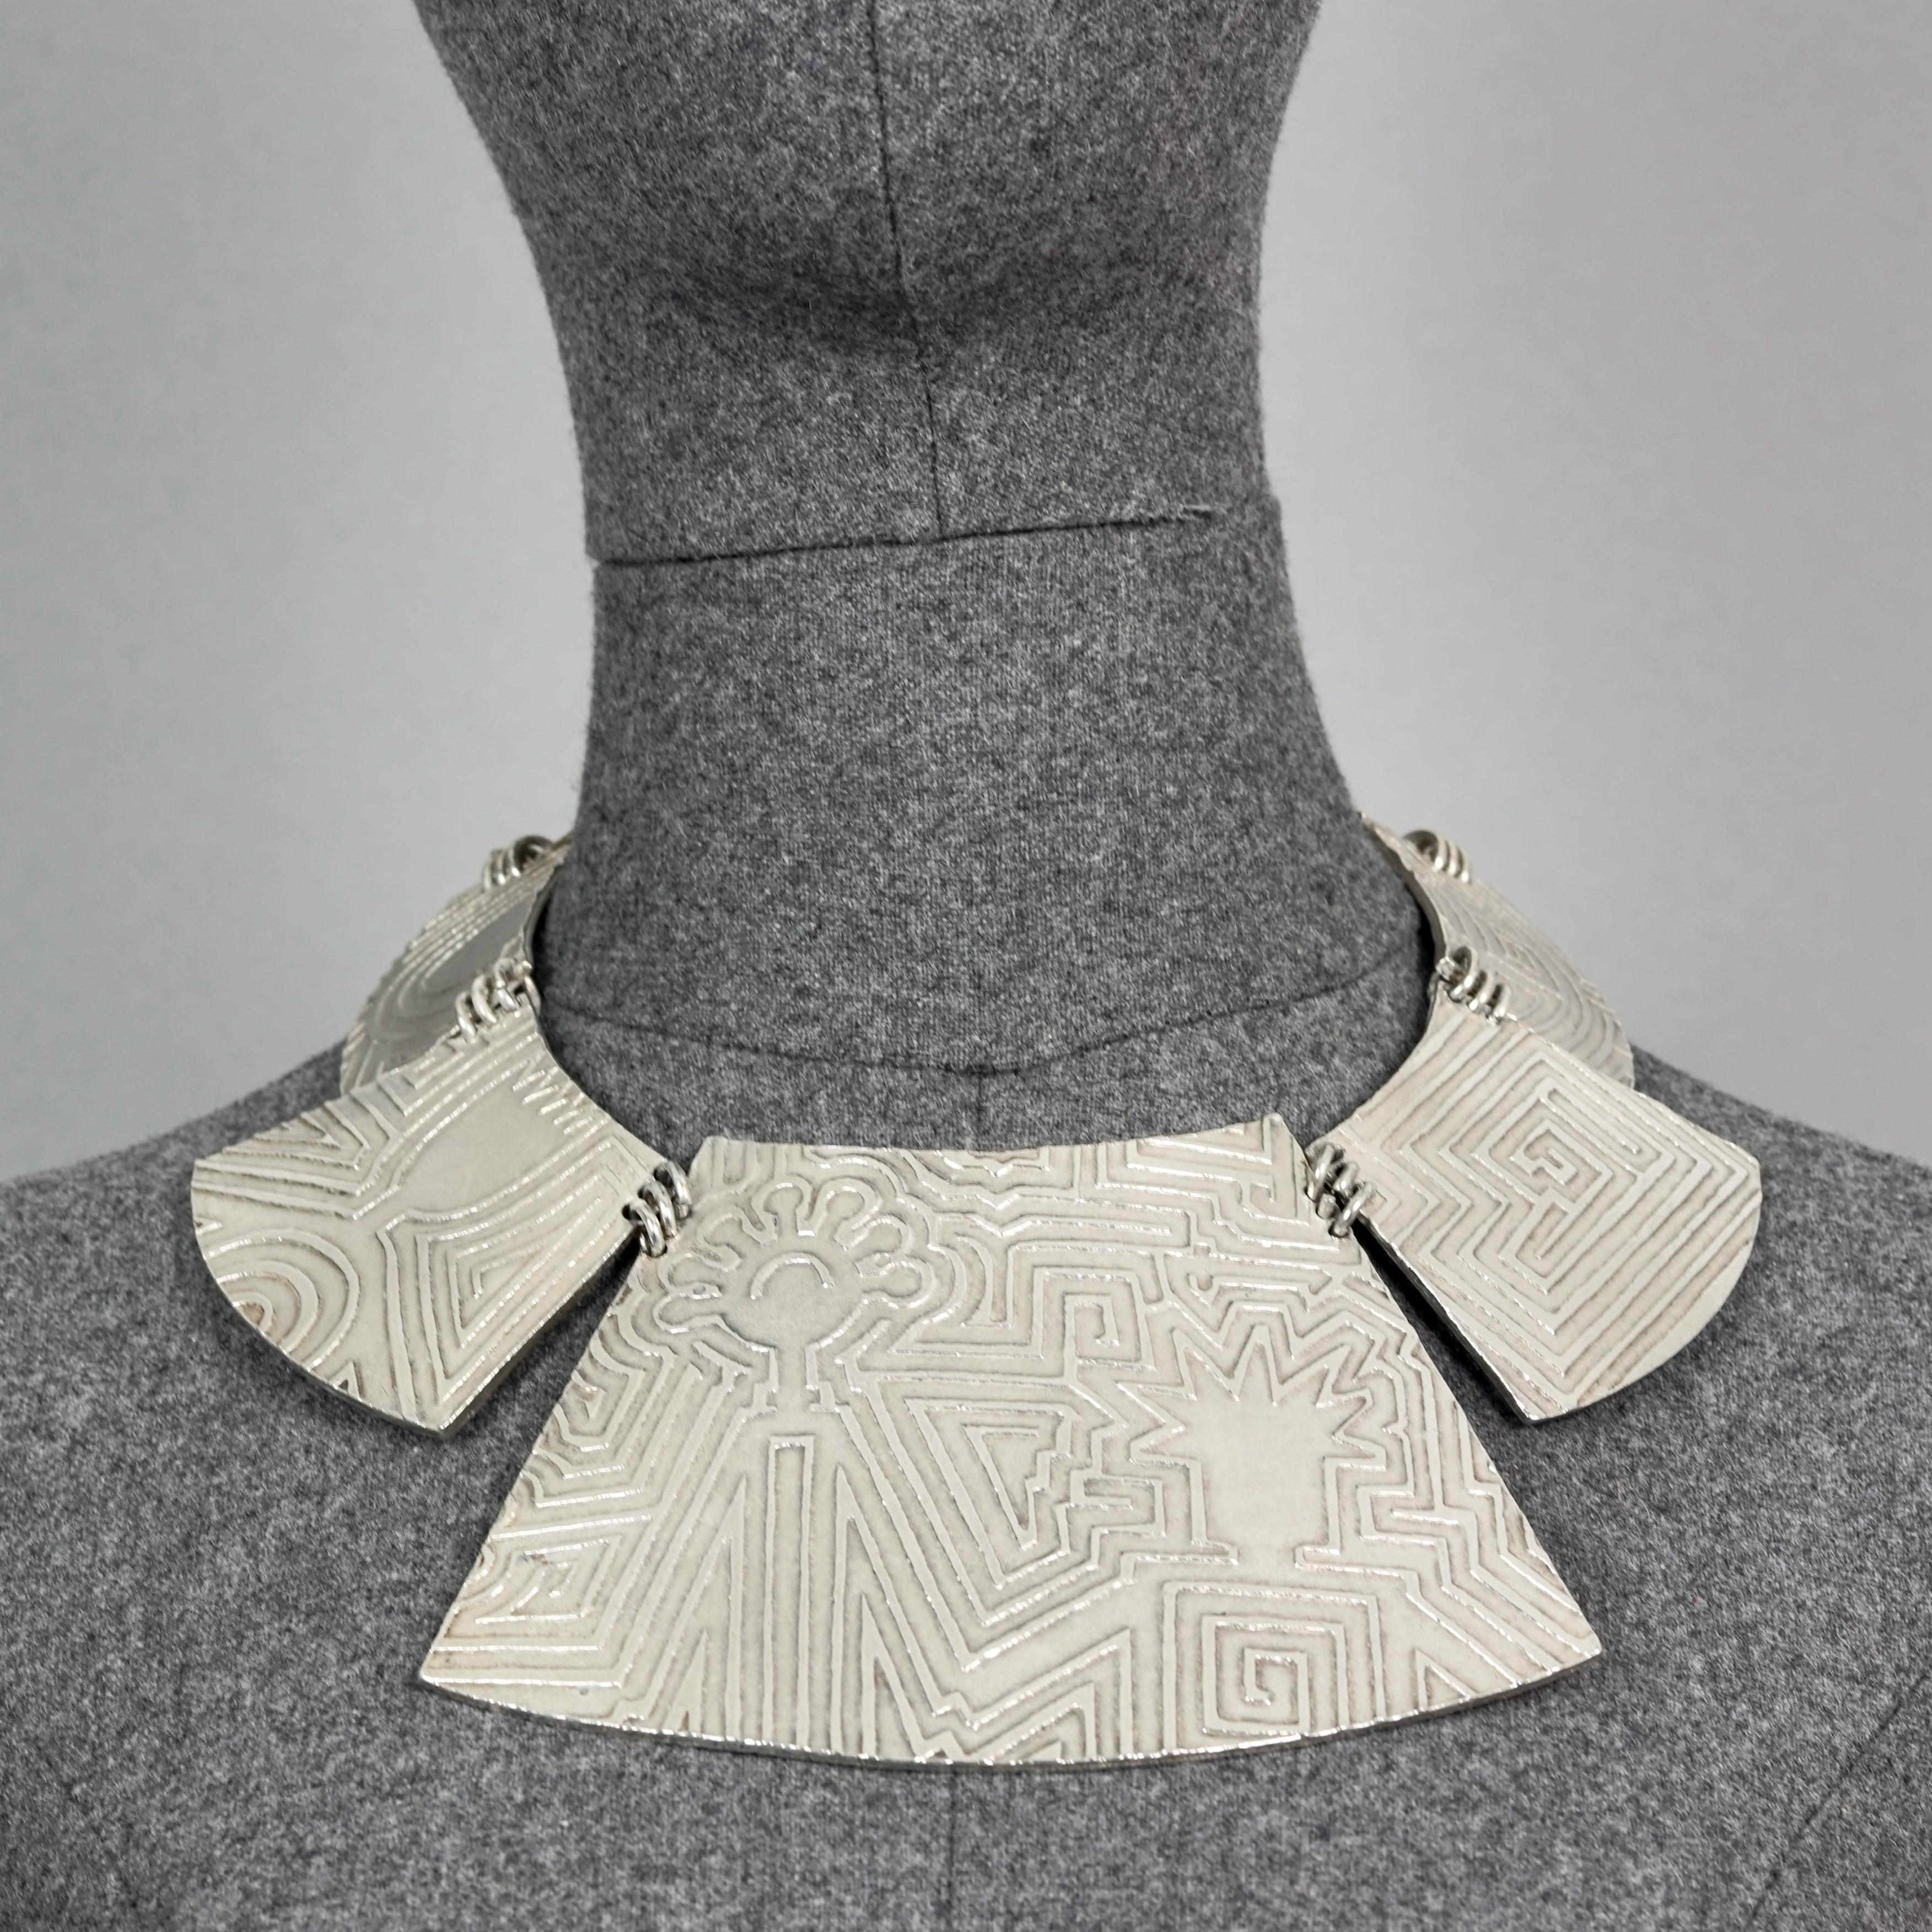 Vintage Massive BICHE DE BERE Figural Abstract Maze Plastron Necklace
Limited edition. 
This is the 60th out of 289 pieces.

Measurements:
Height: 3.74 inches (9.5 cm)
Wearable Length: 15.35 inches (39 cm)

Features:
- 100% Authentic BICHE DE